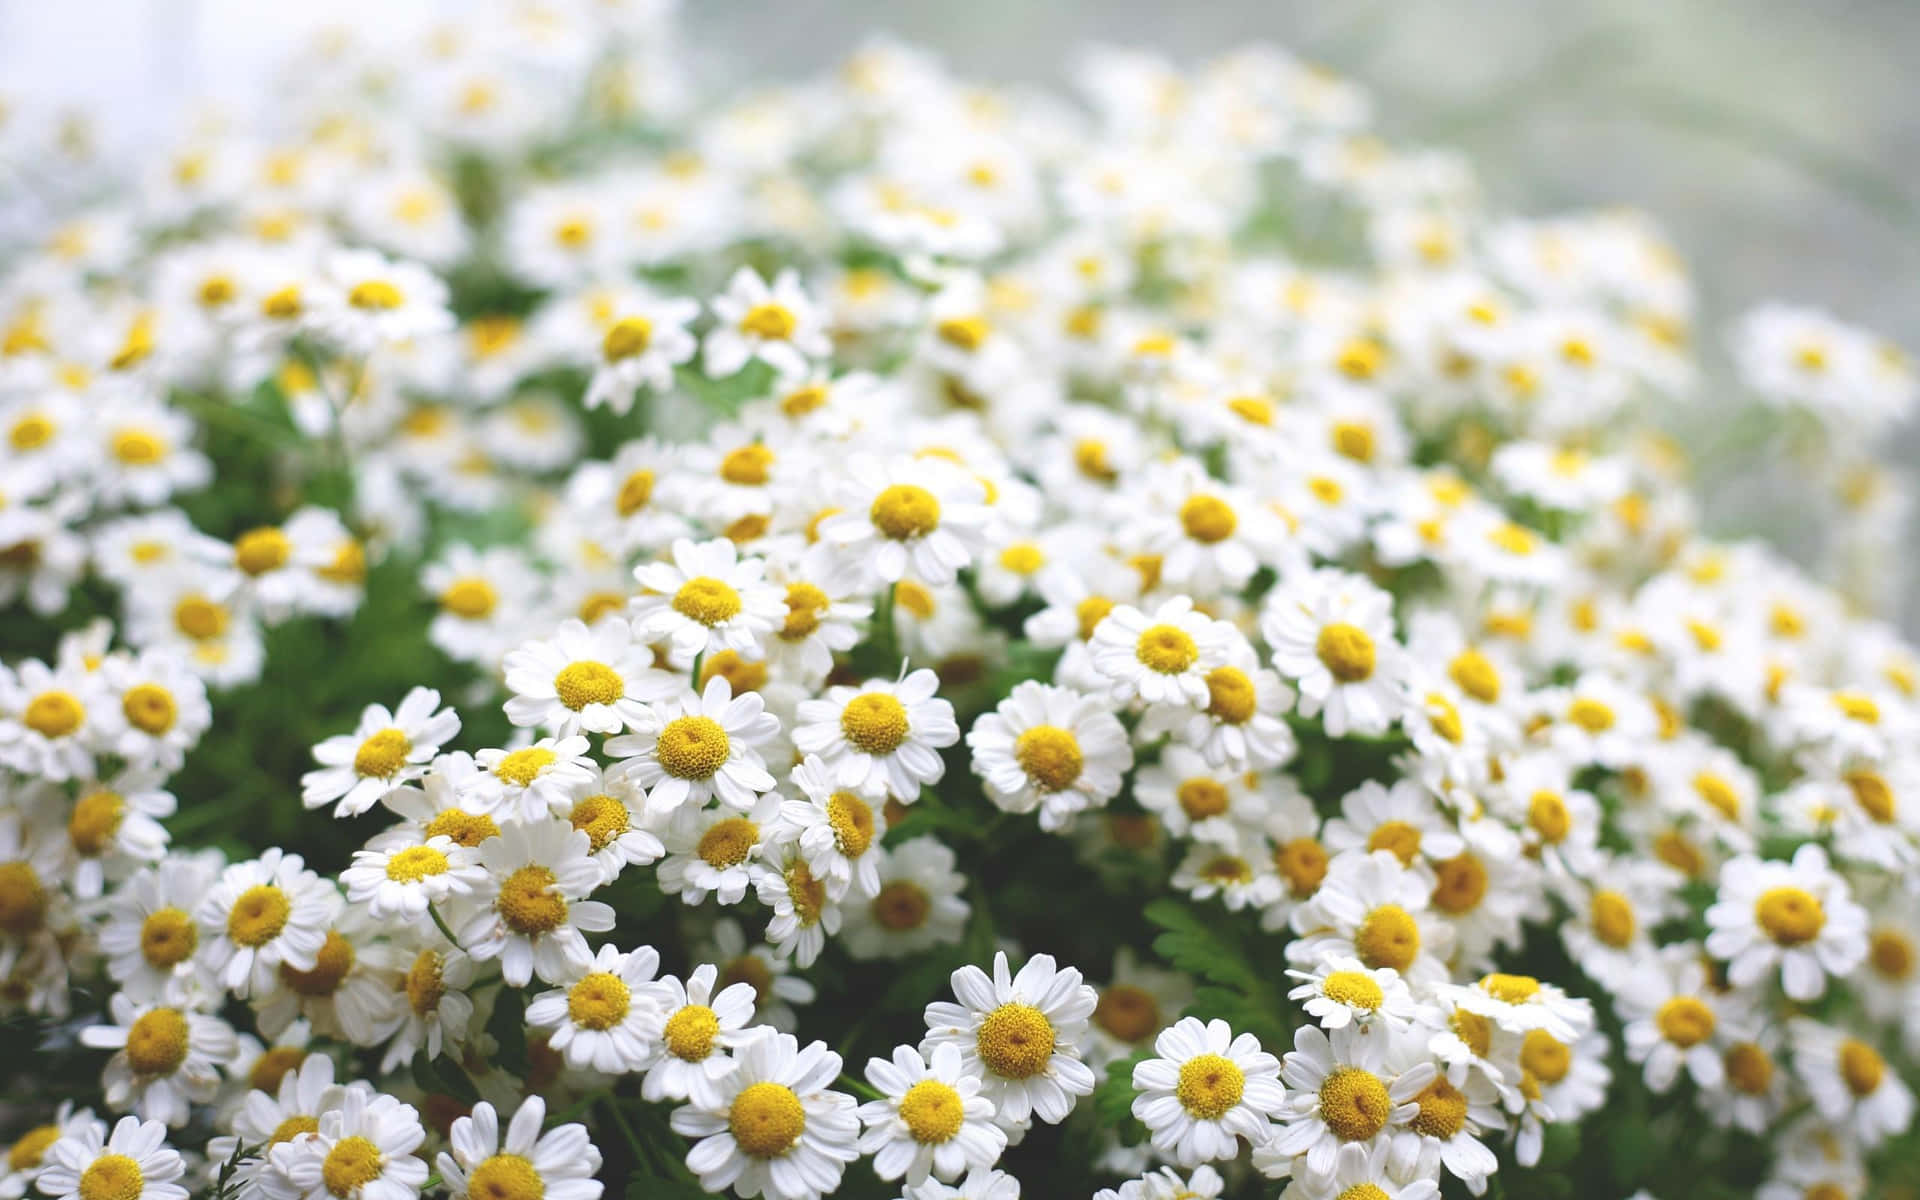 Work Smoothly with Daisy Laptop Wallpaper